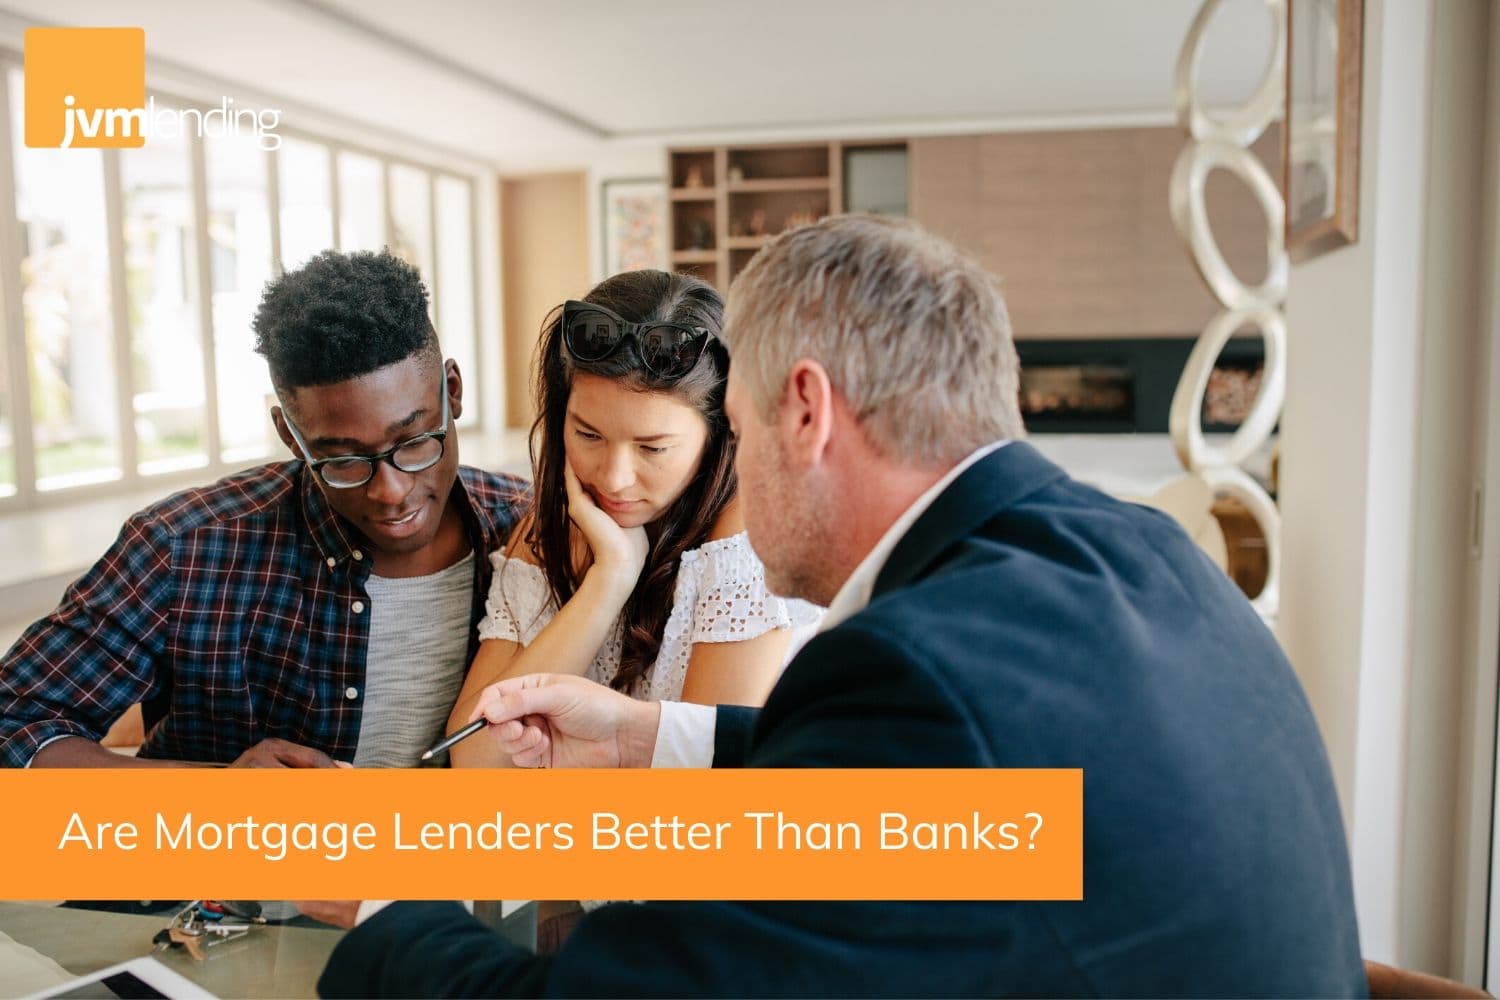 Homebuyers review a mortgage application with their local mortgage lender. Local lenders are often the best option for helping clients purchase or refinance a home.